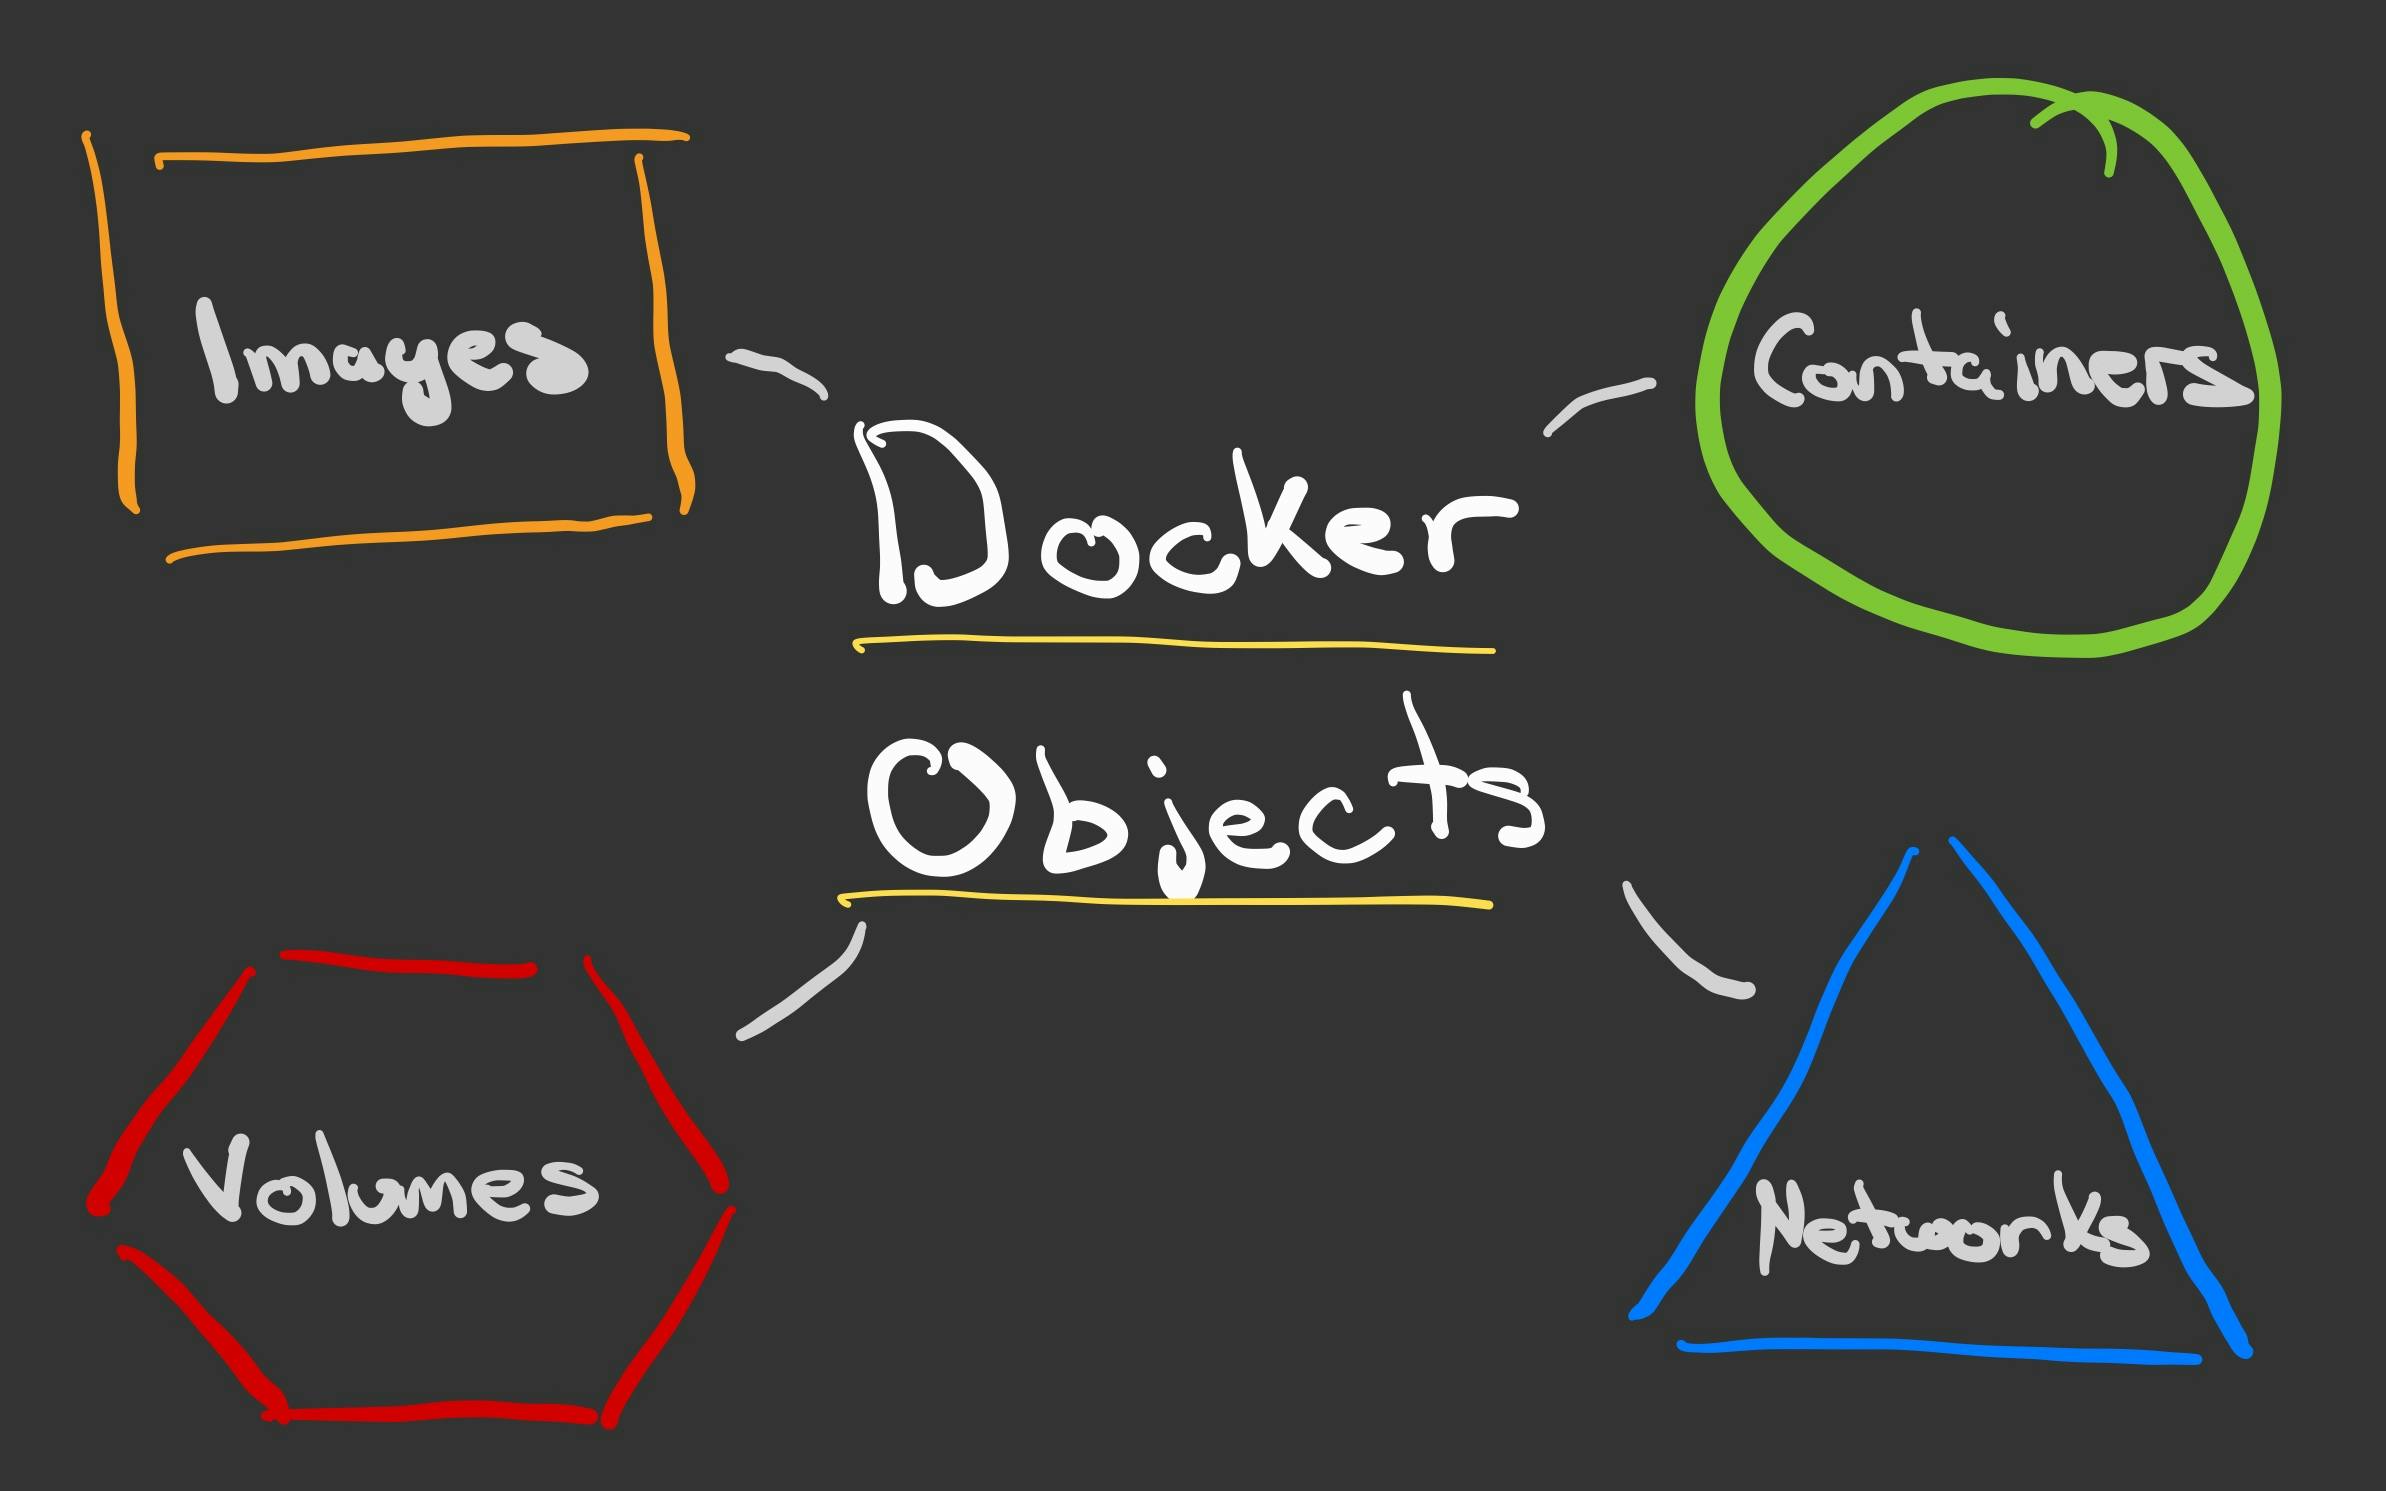 Docker objects: images, containers, volumes, and networks